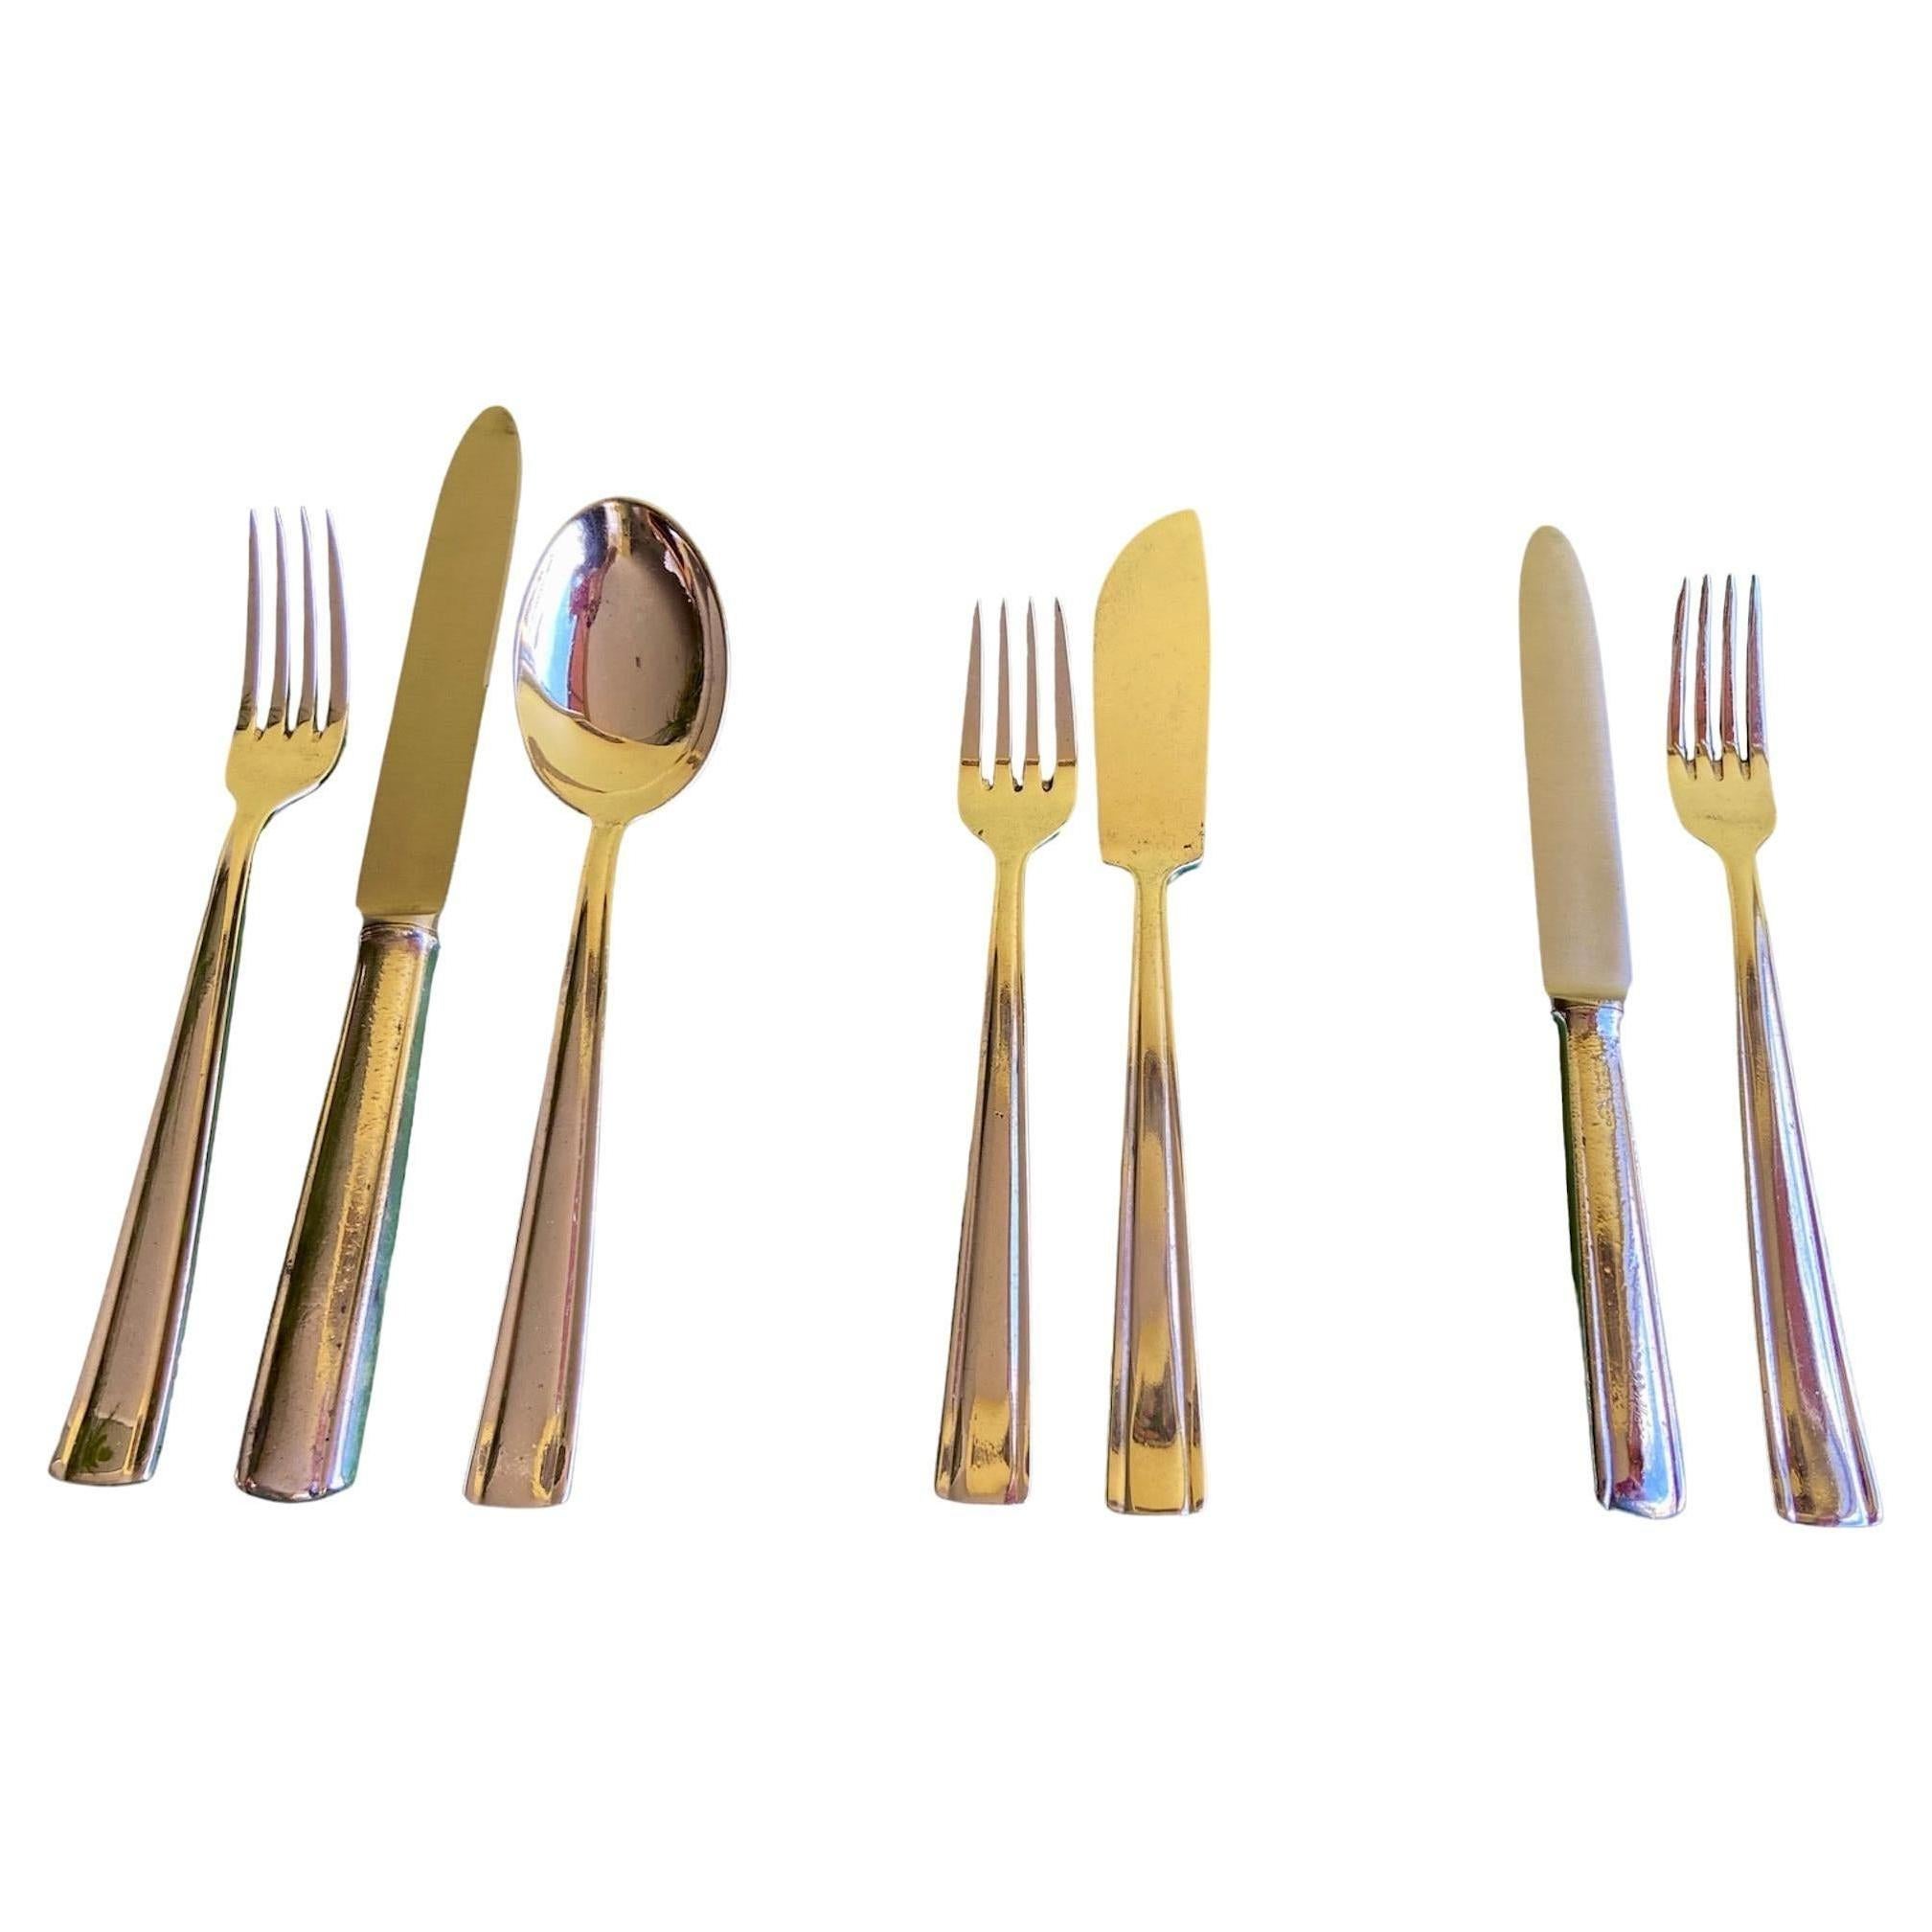 mid-century cutlery sets for 6, A Krupp, 42 pieces each, attributed to Gio Ponti For Sale